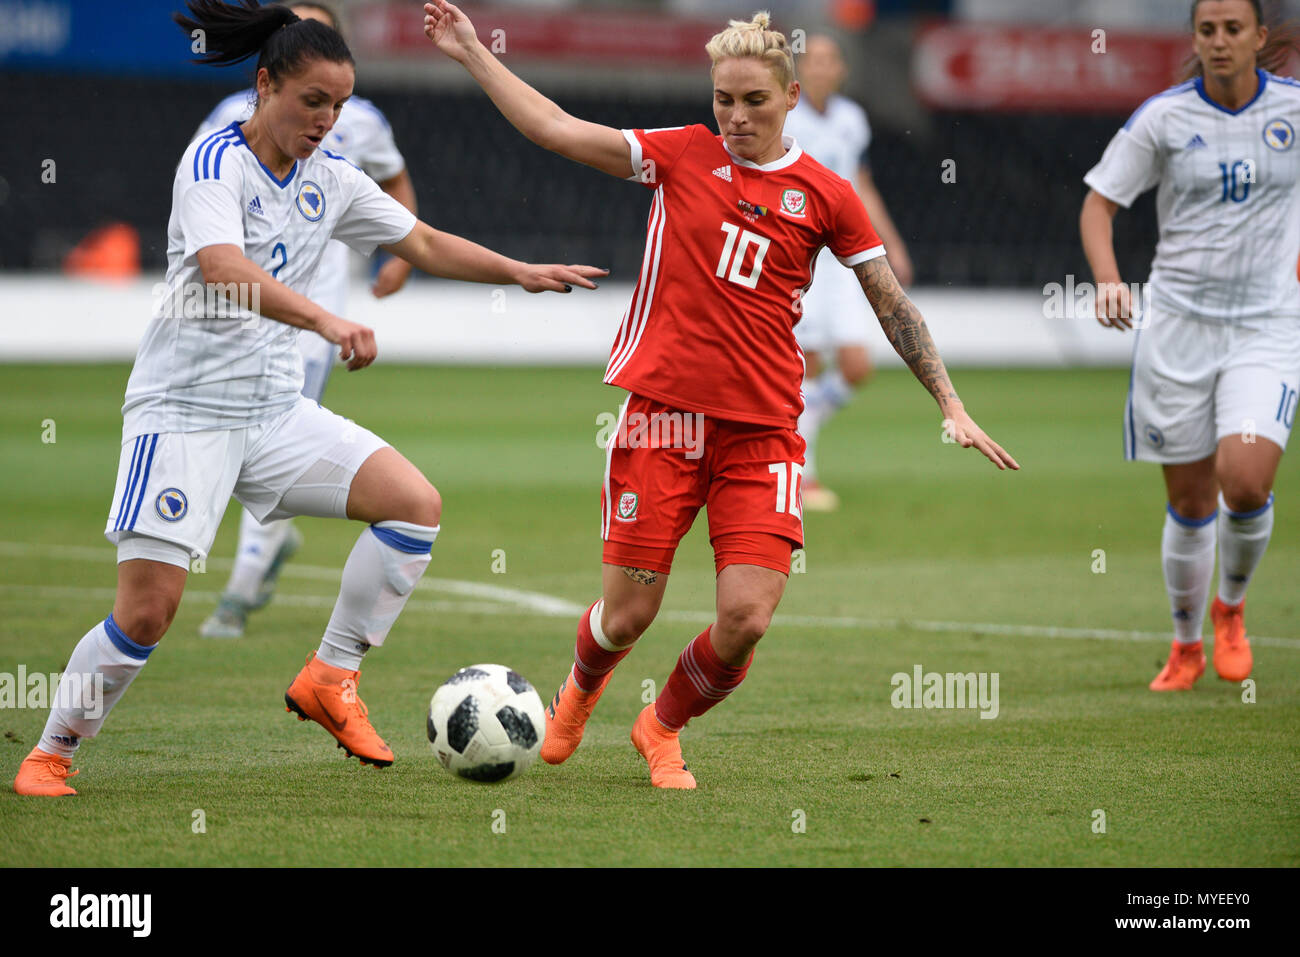 Swansea, UK. 7th Jun, 2018. Wales v Bosnia Womens International World Cup Qualifier, Liberty Stadium, Swansea,7/6/18: Jess fishlock of Wales competes for the ball Credit: Andrew Dowling/Influential Photography/Alamy Live News Stock Photo